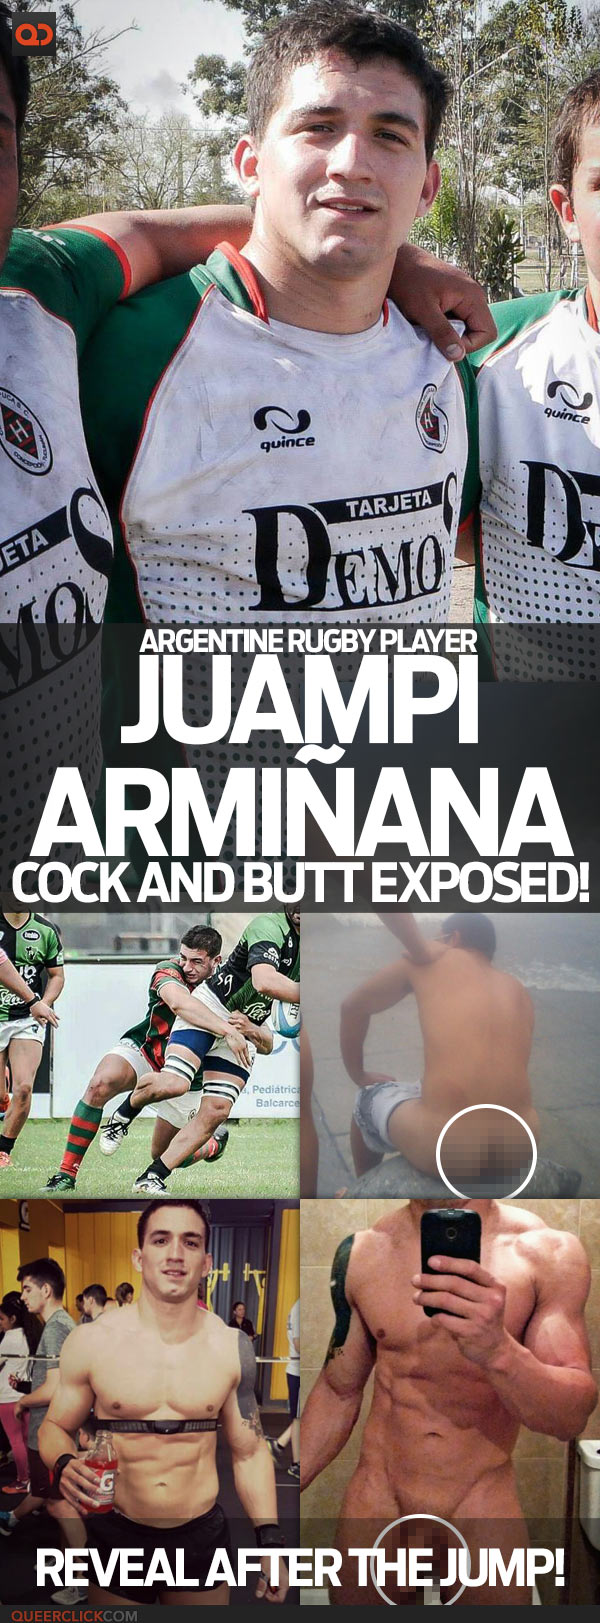 Juampi Armiñana, Argentine Rugby Player, Cock And Butt Exposed!